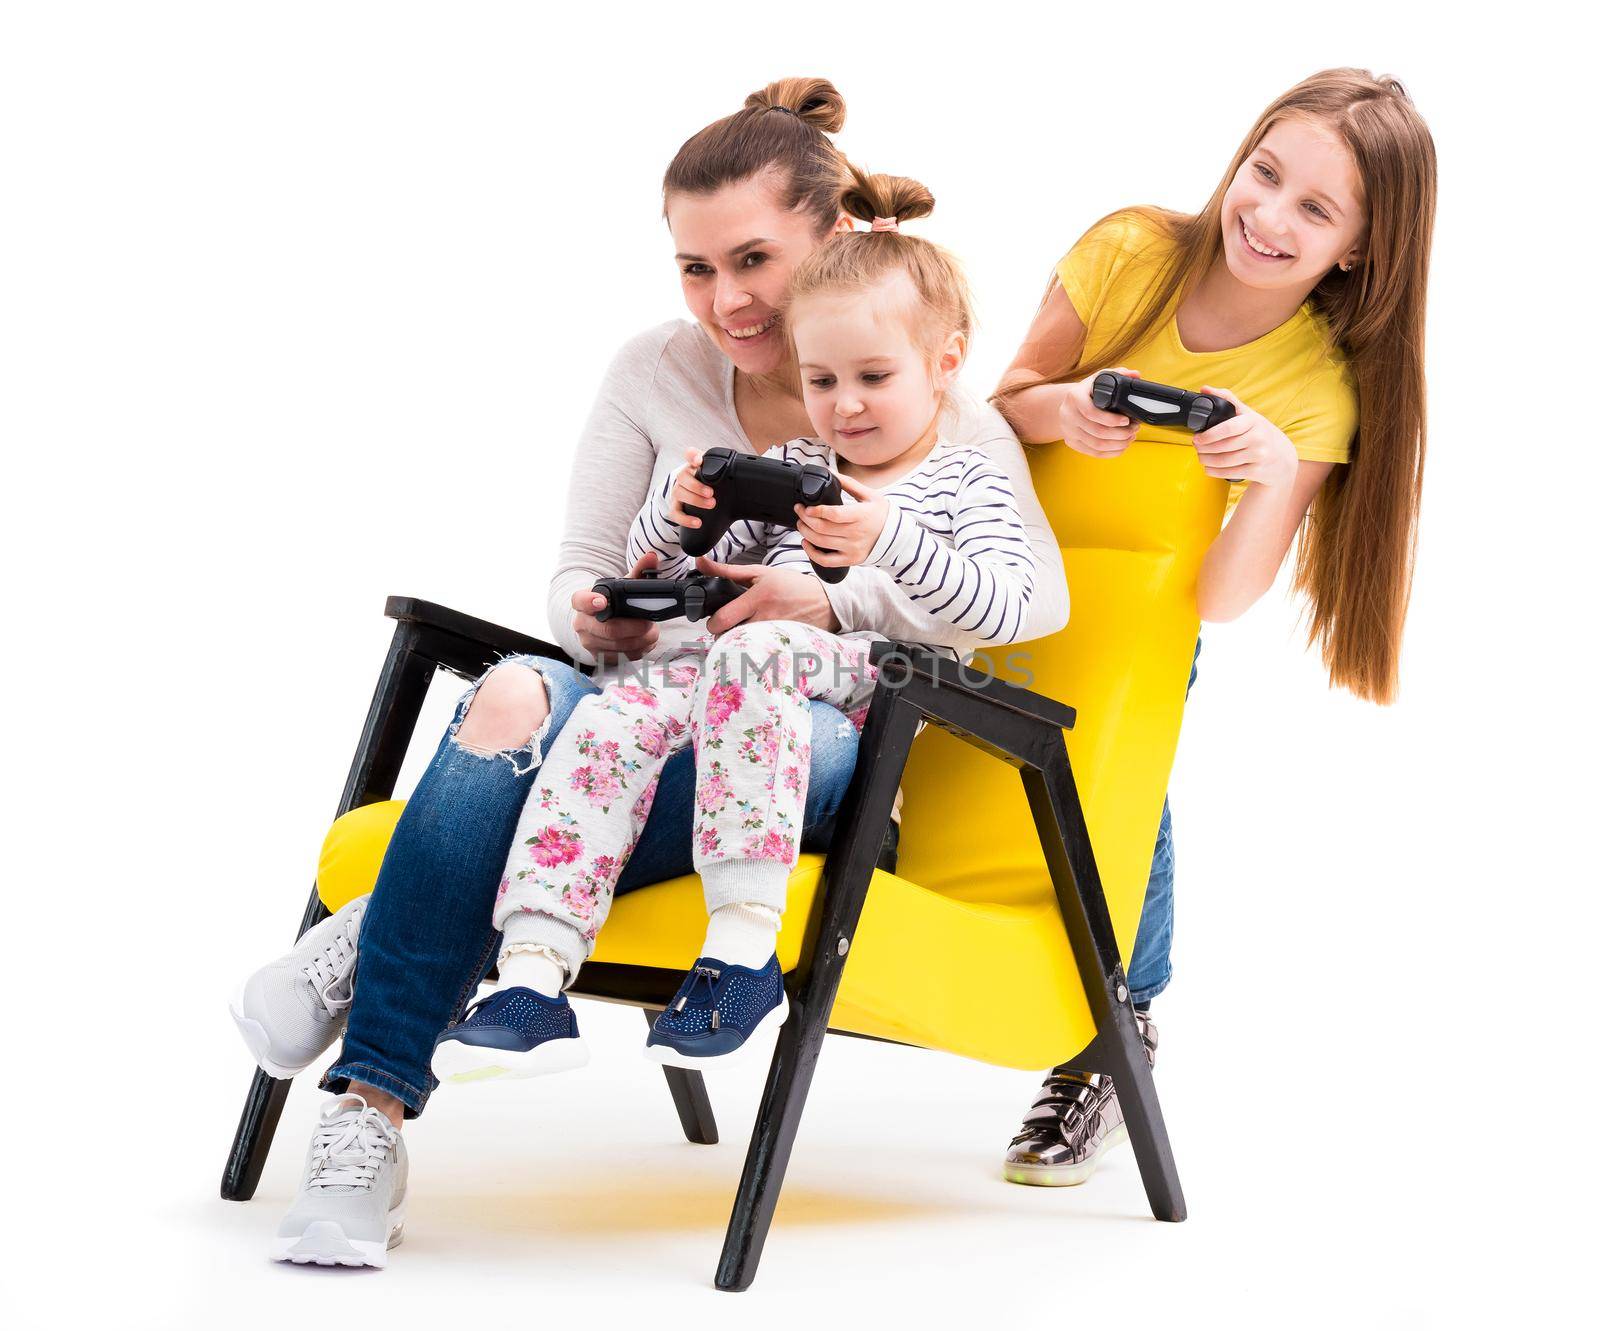 Family of three on leather yellow chair enjoying their time playing computer games with joystick